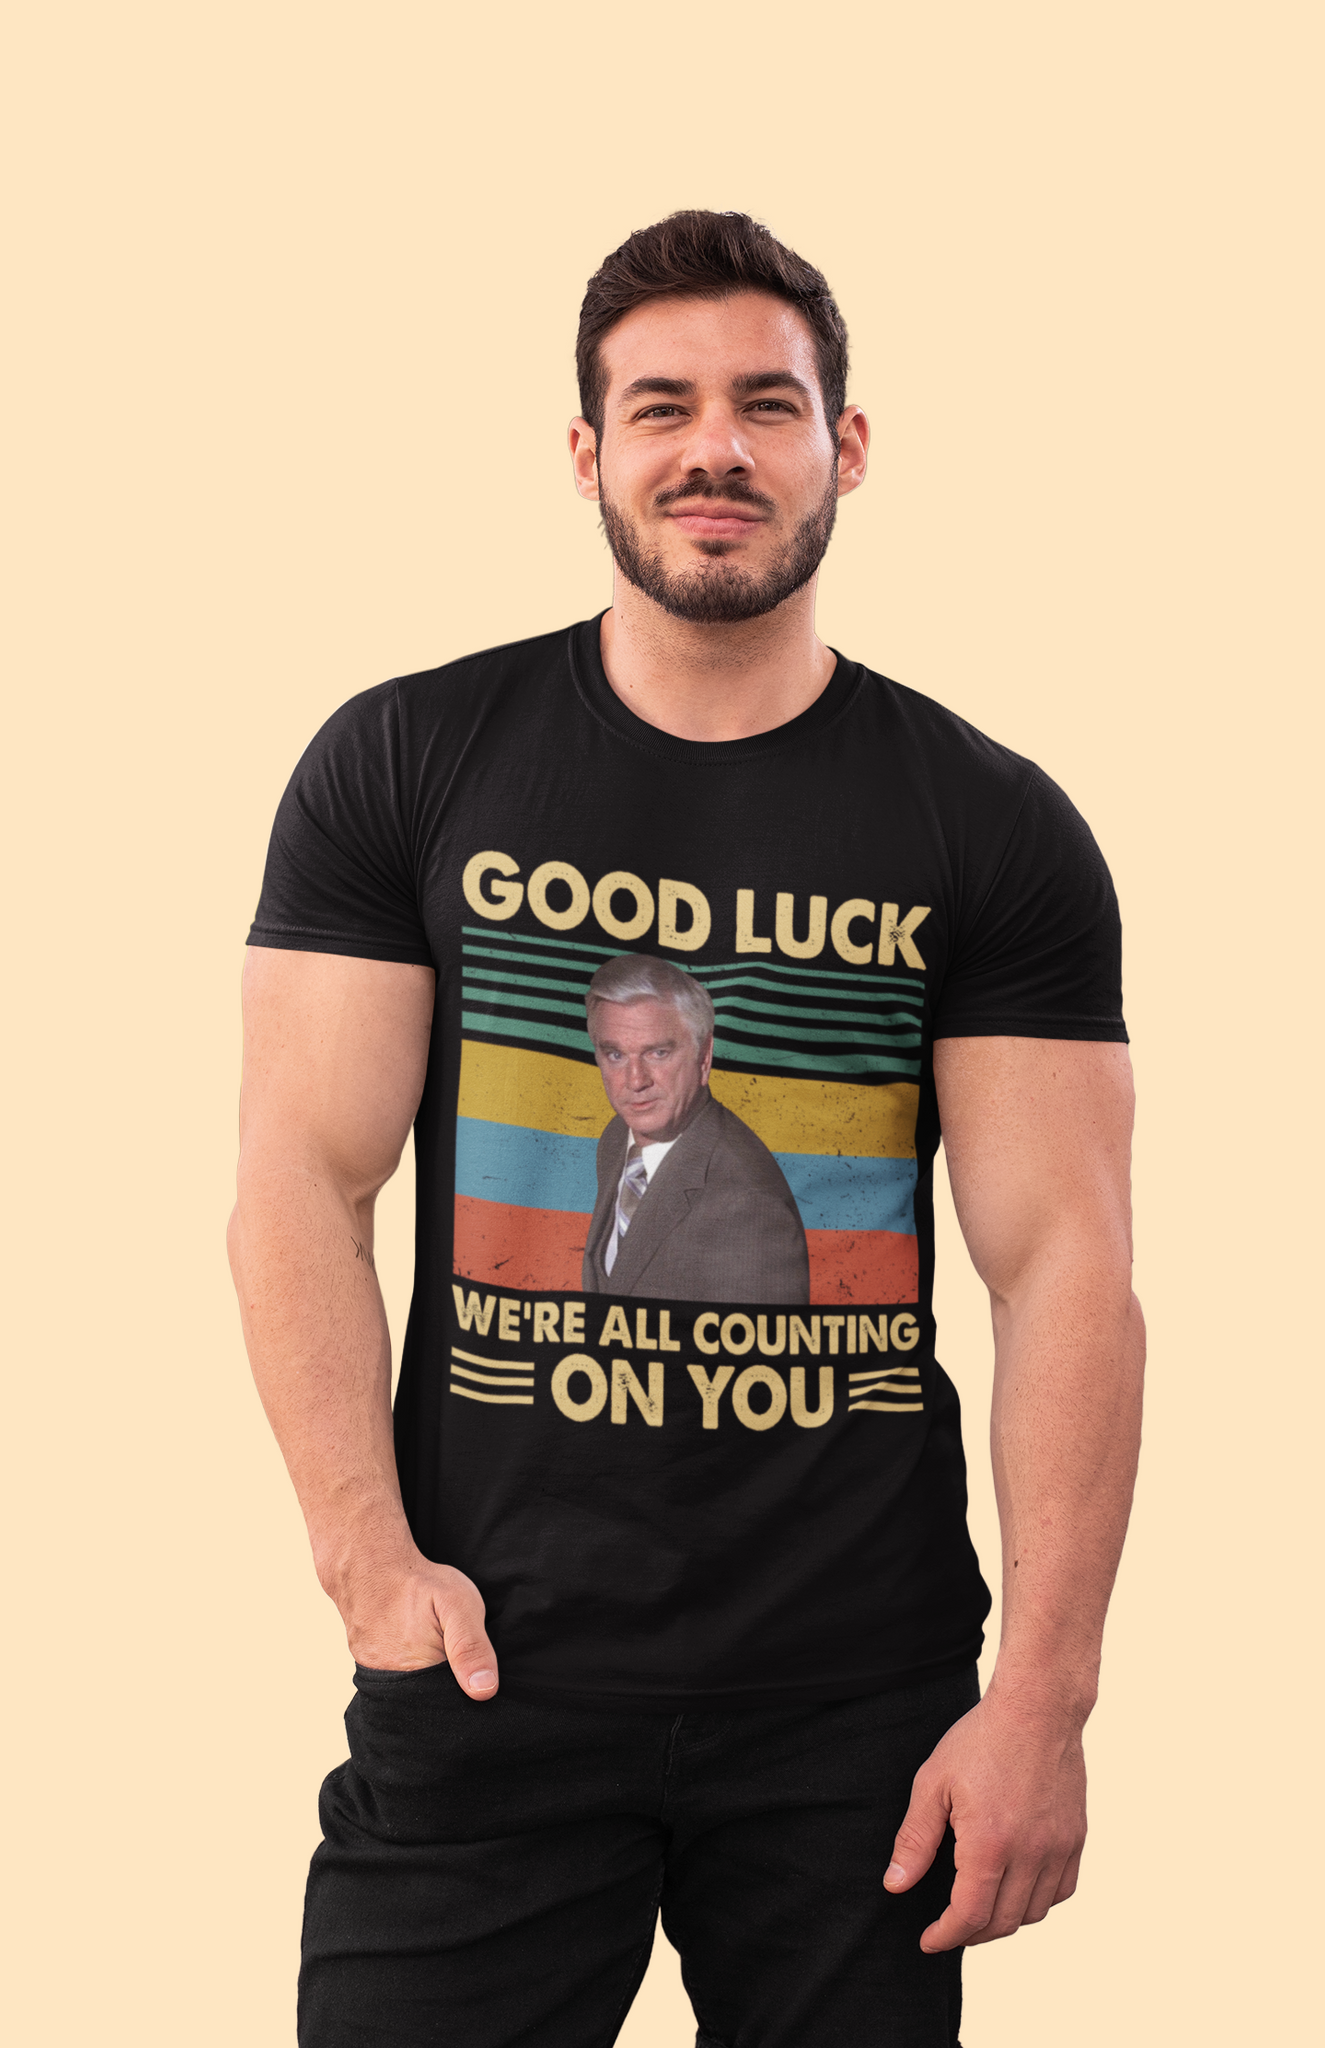 Airplane Vintage T Shirt, Dr Rumack T Shirt, Good Luck Were All Counting On You Tshirt